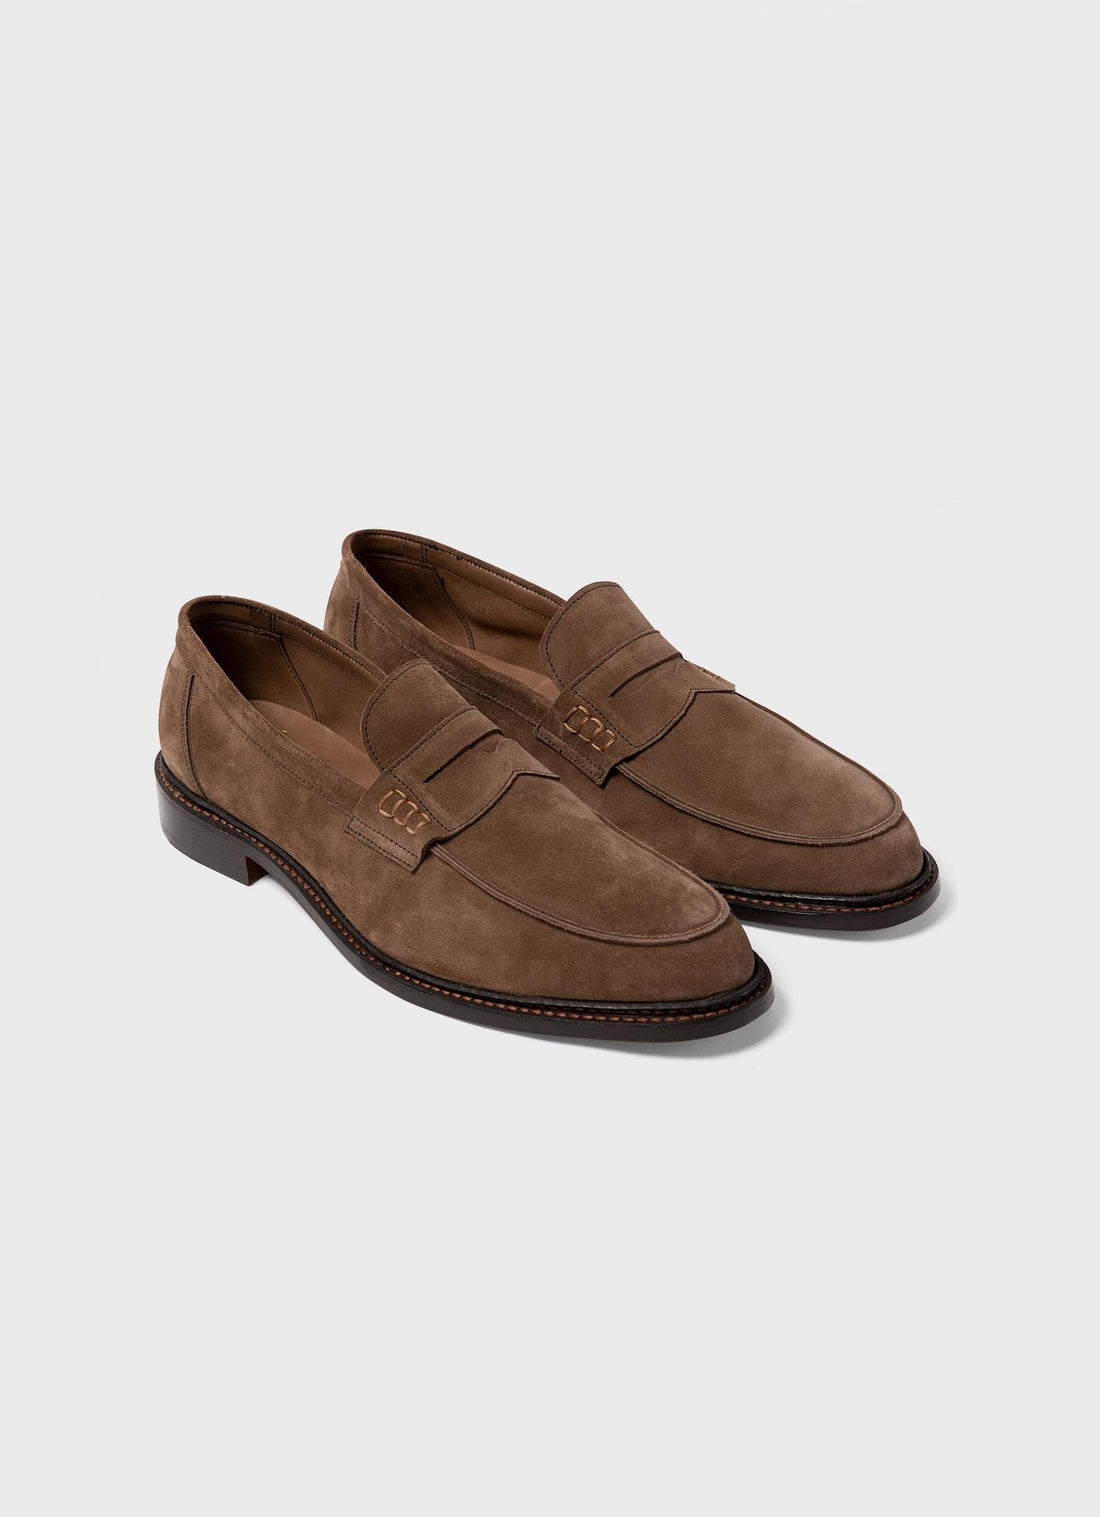 Men's Sunspel and Trickers Suede Loafer in Light Brown